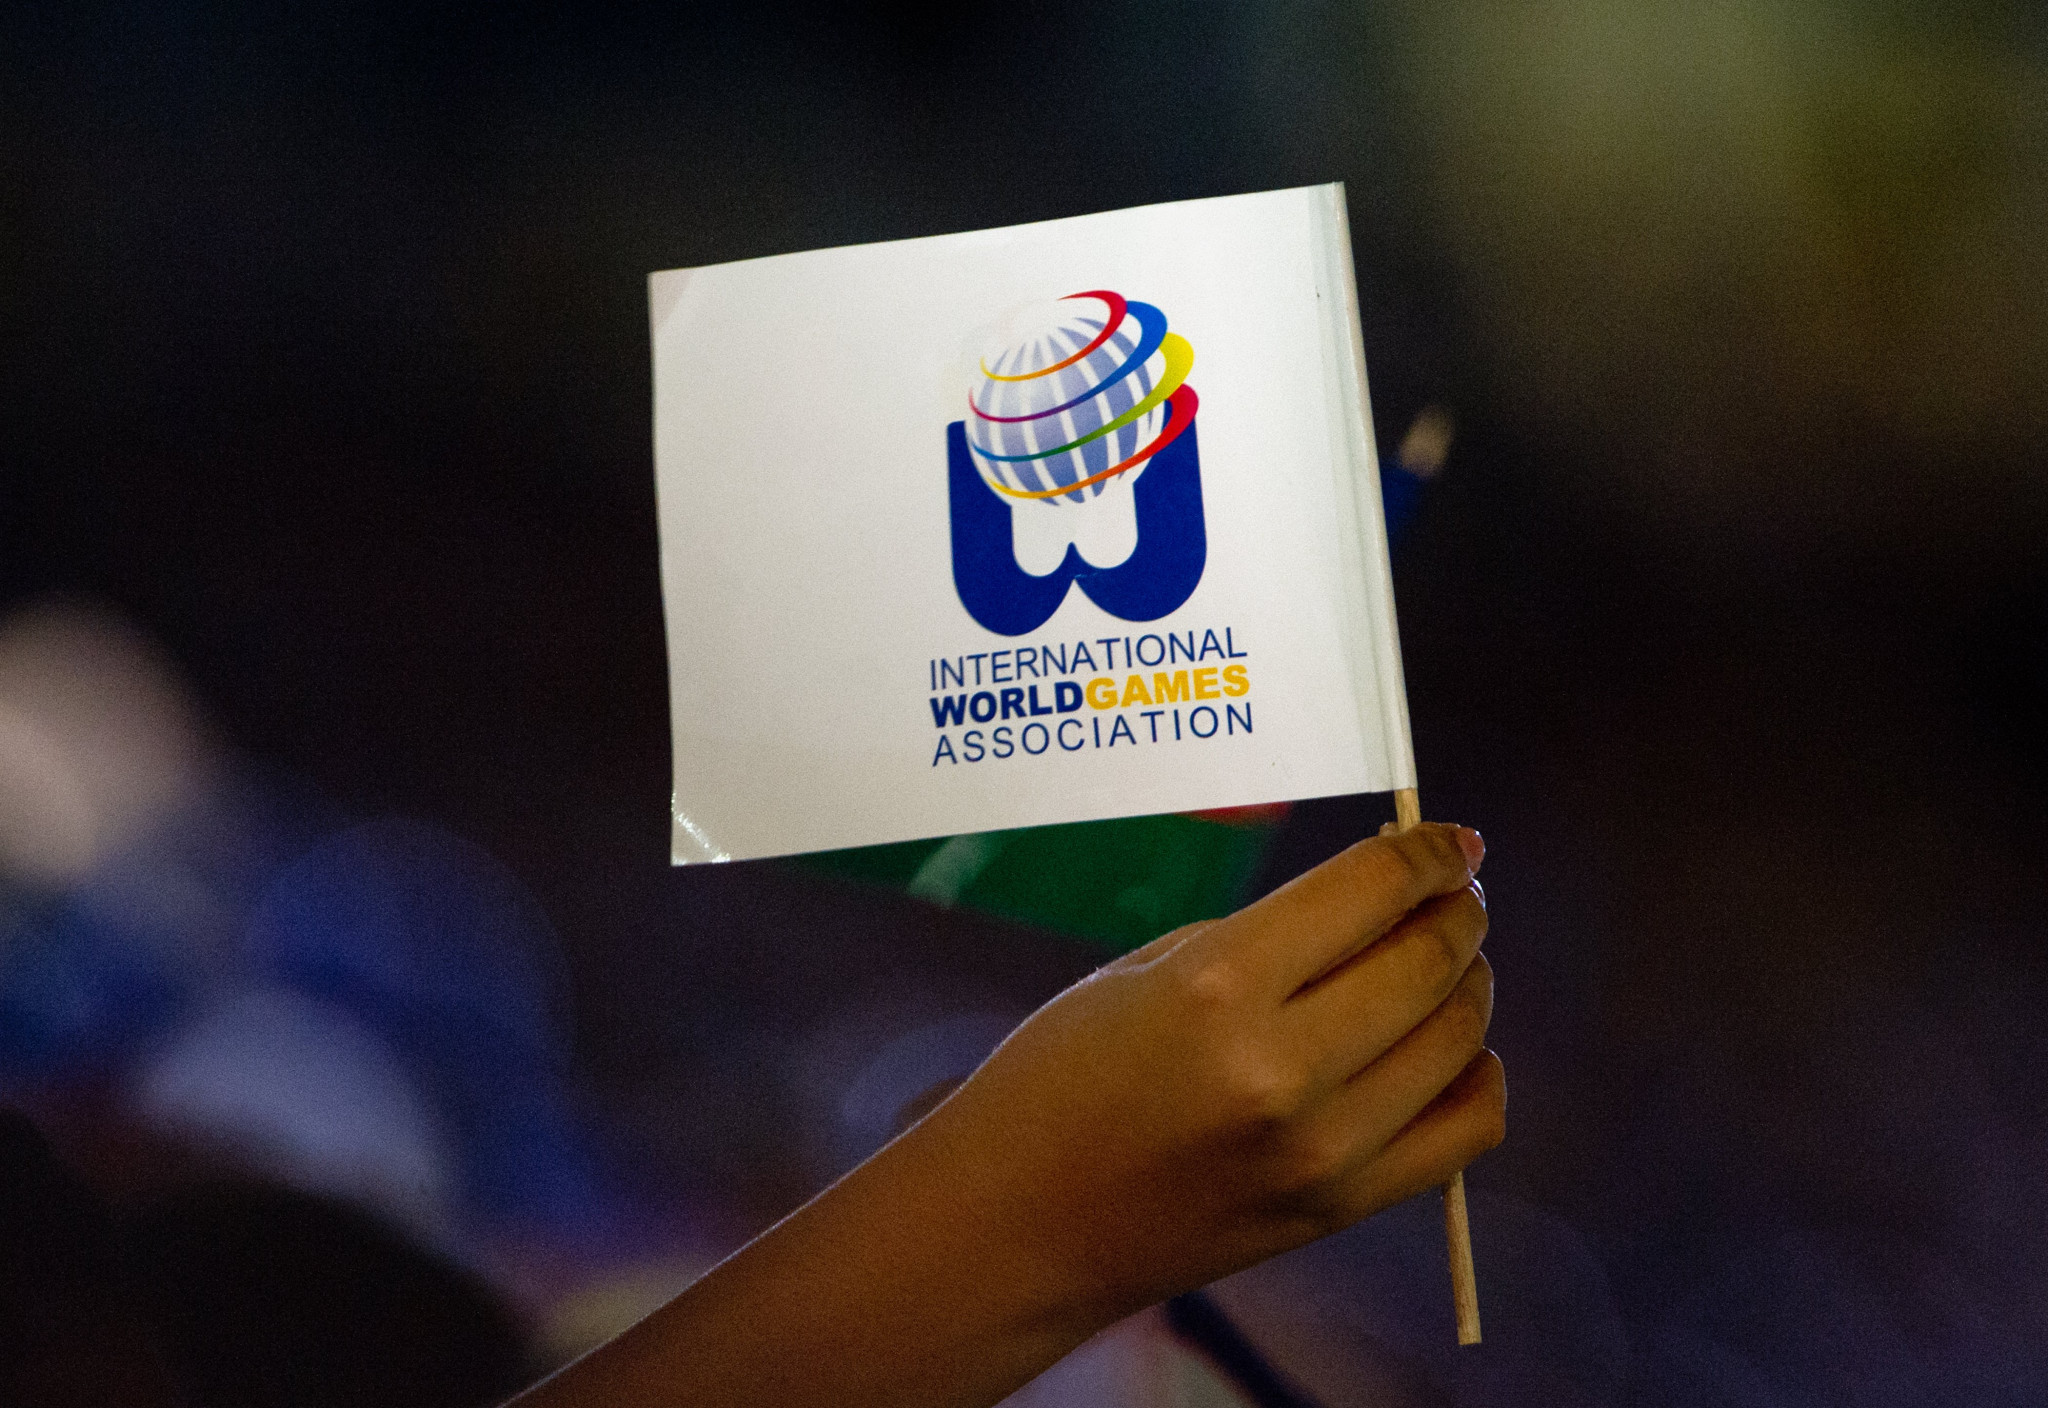 Around 3,600 athletes are set to compete at the Birmingham 2022 World Games ©Getty Images